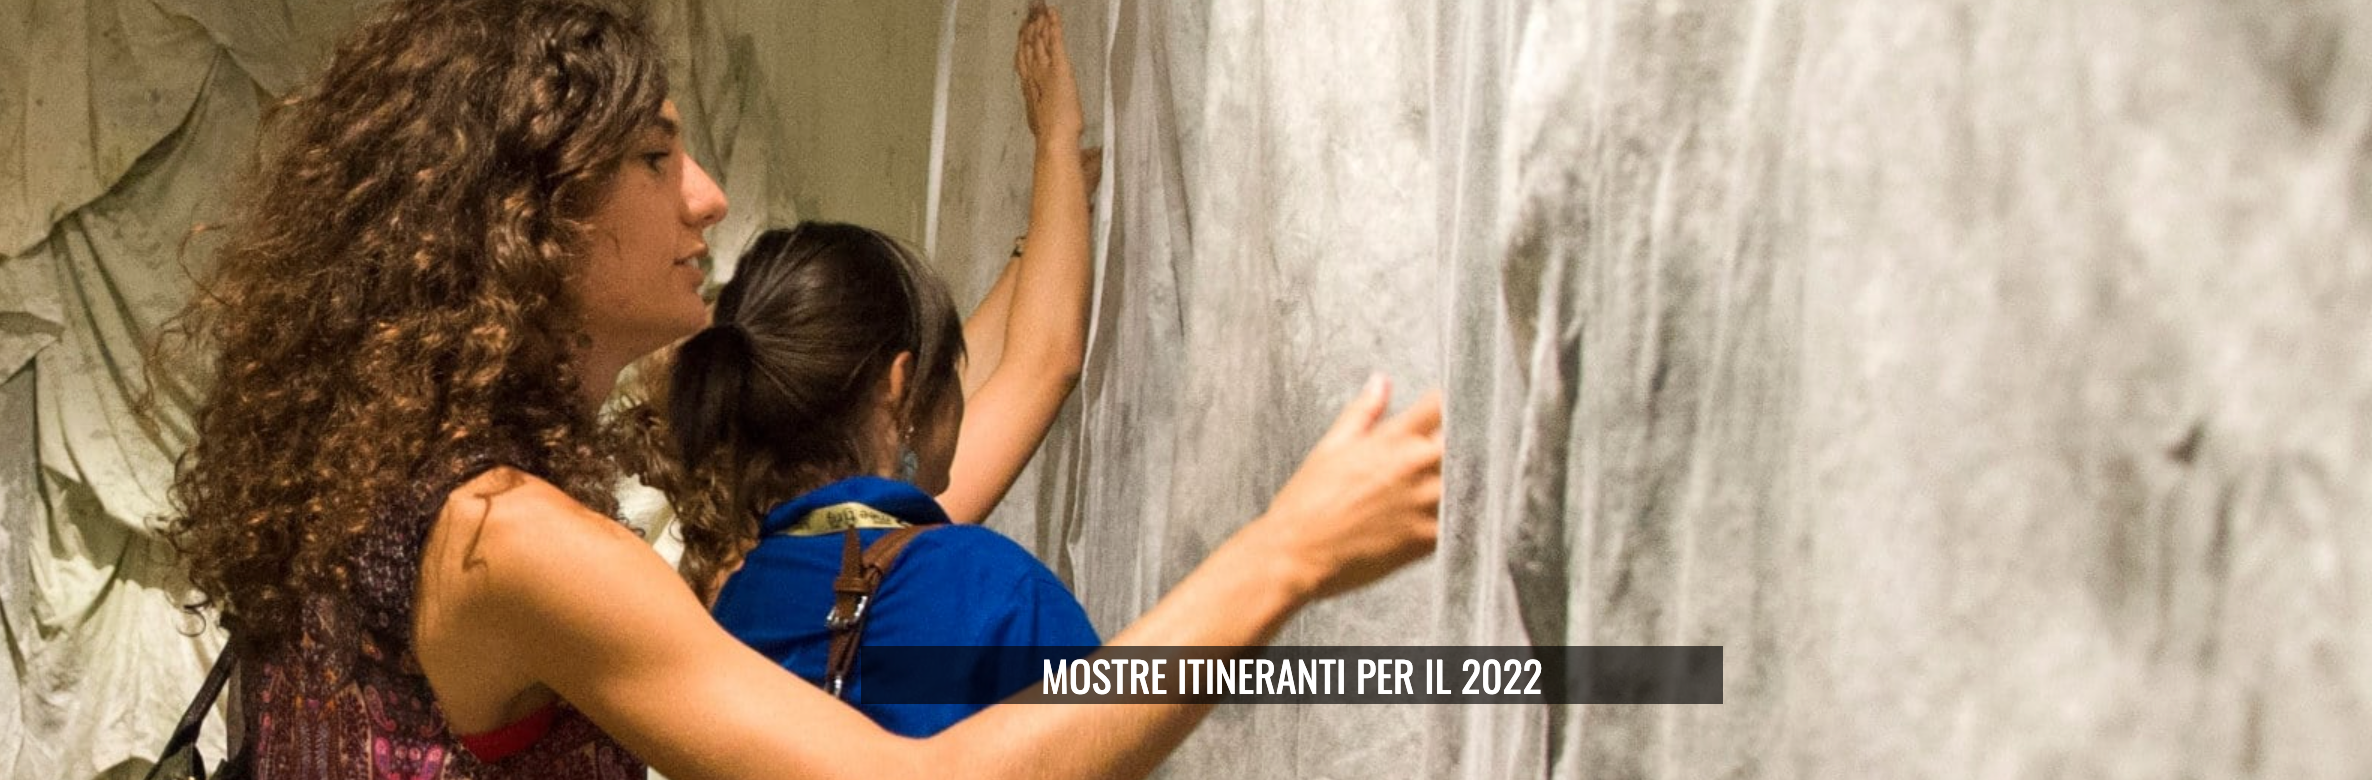 Featured image for “Mostre Meeting itineranti per il 2022”